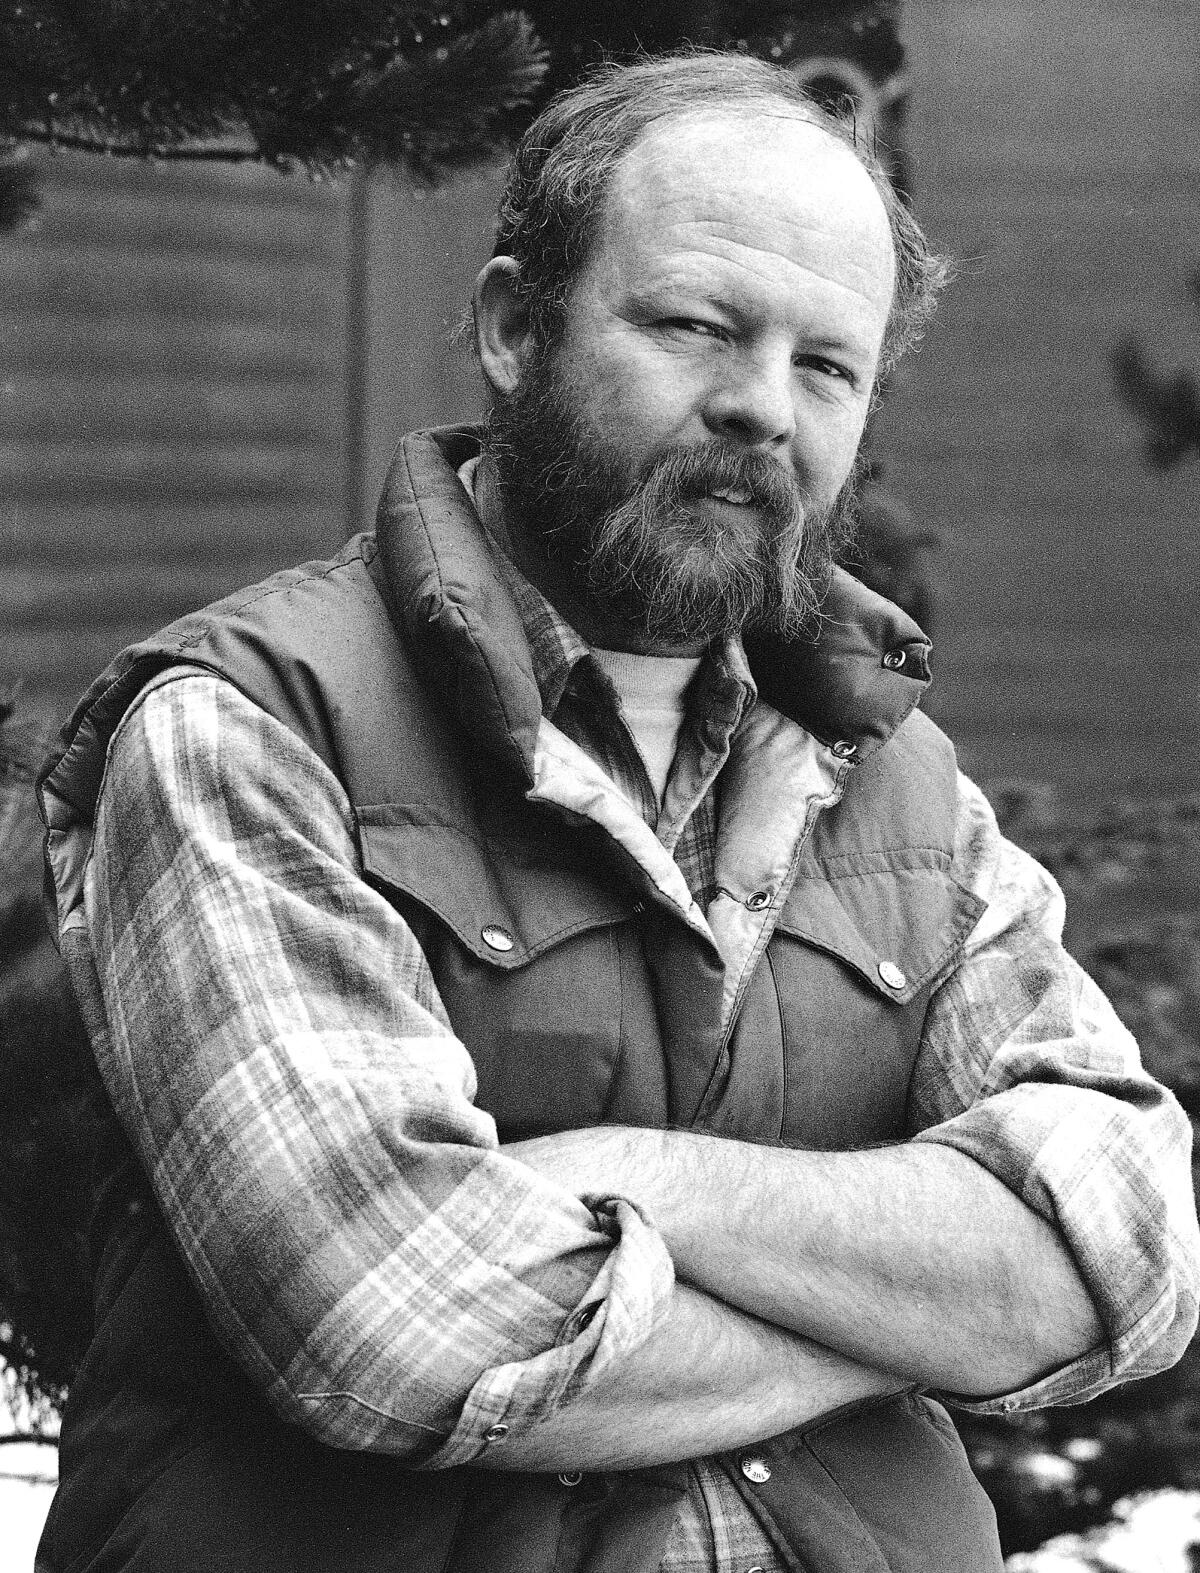 A man with a beard wearing a long-sleeved plaid shirt and a vest stands with his arms folded across his chest.